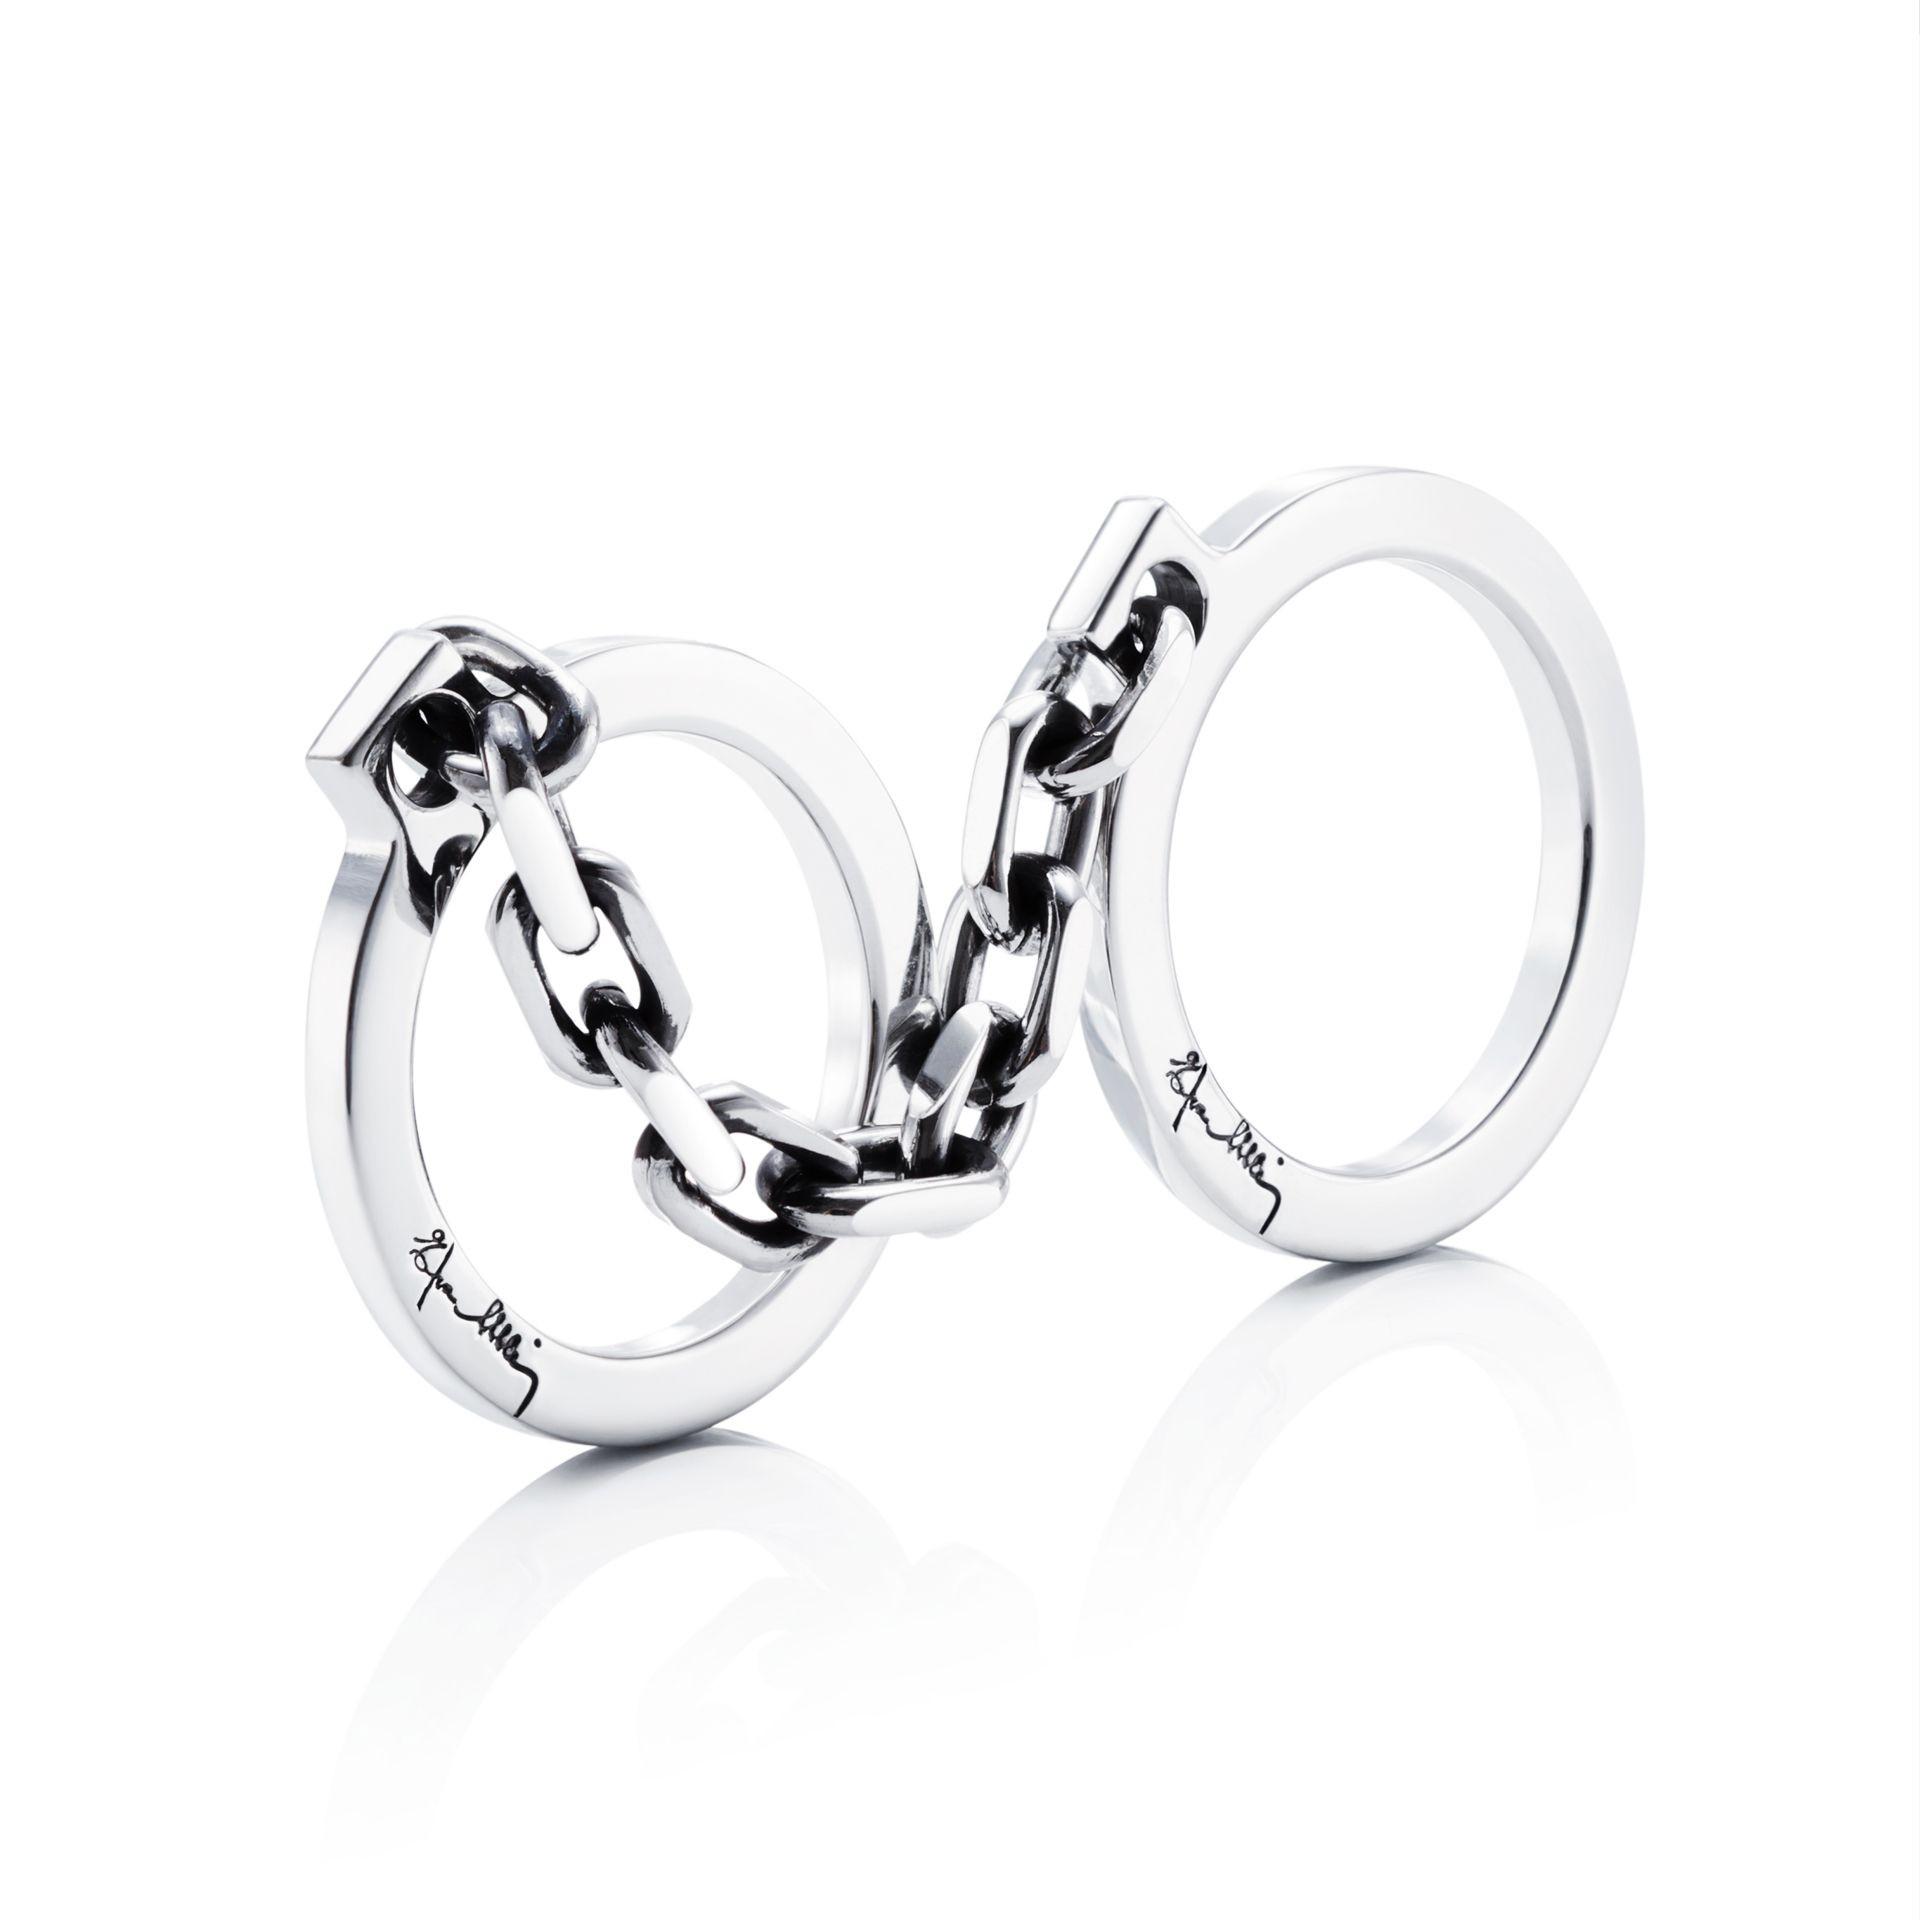 Passion Cuffs Ring